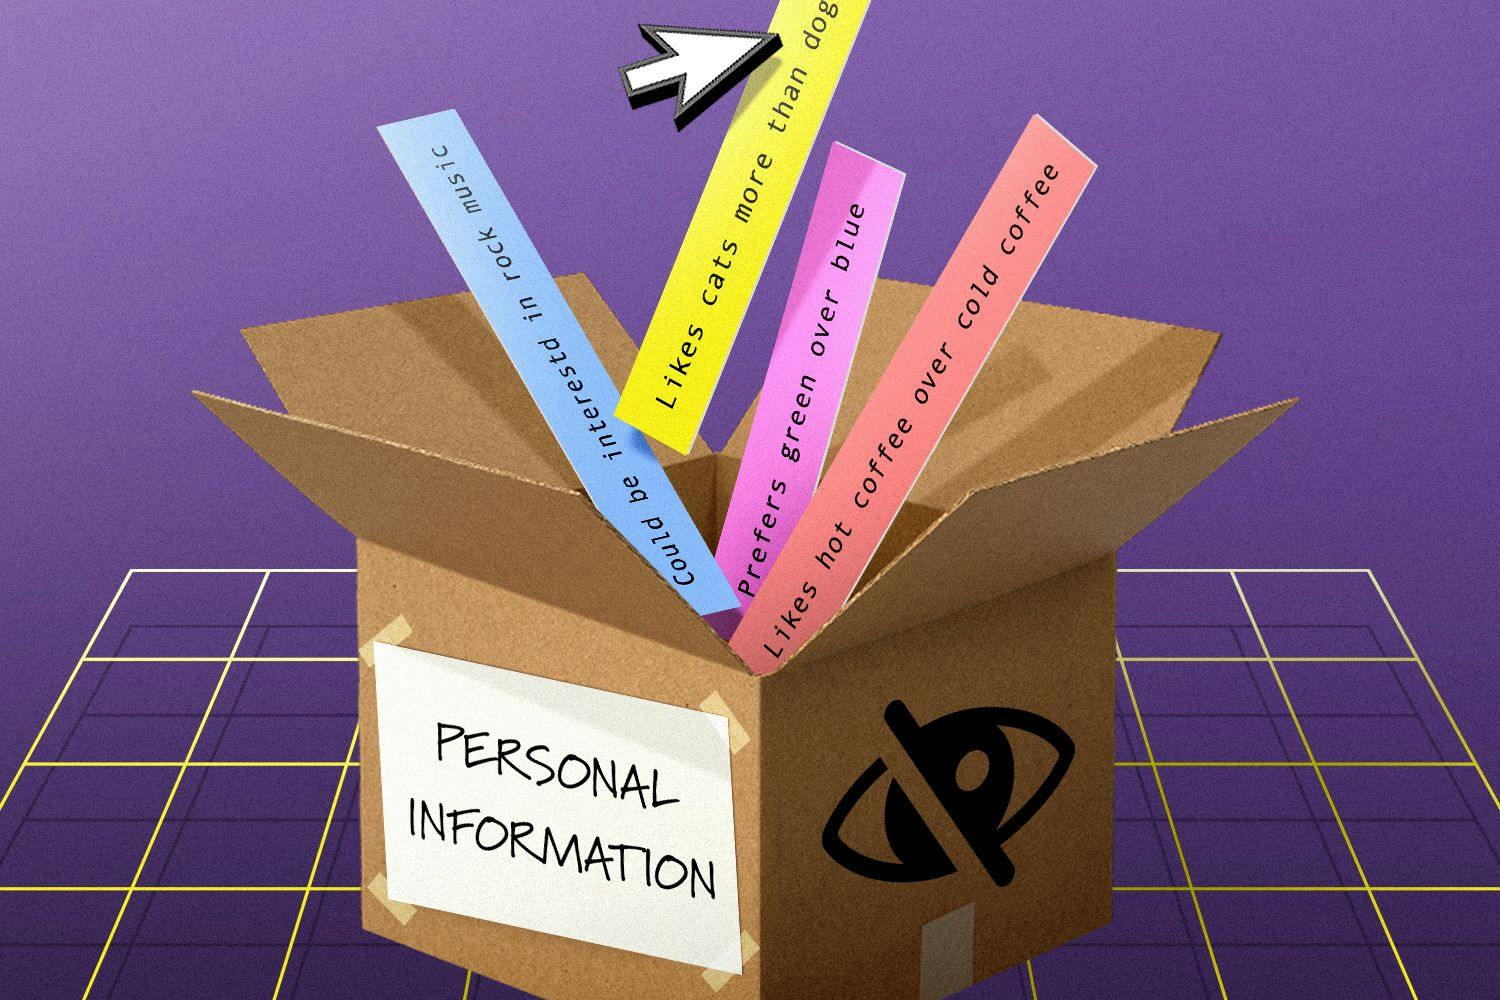 a cardboard box labeled "personal information" with little slips of info going into it, such as "likes cats more than dogs"